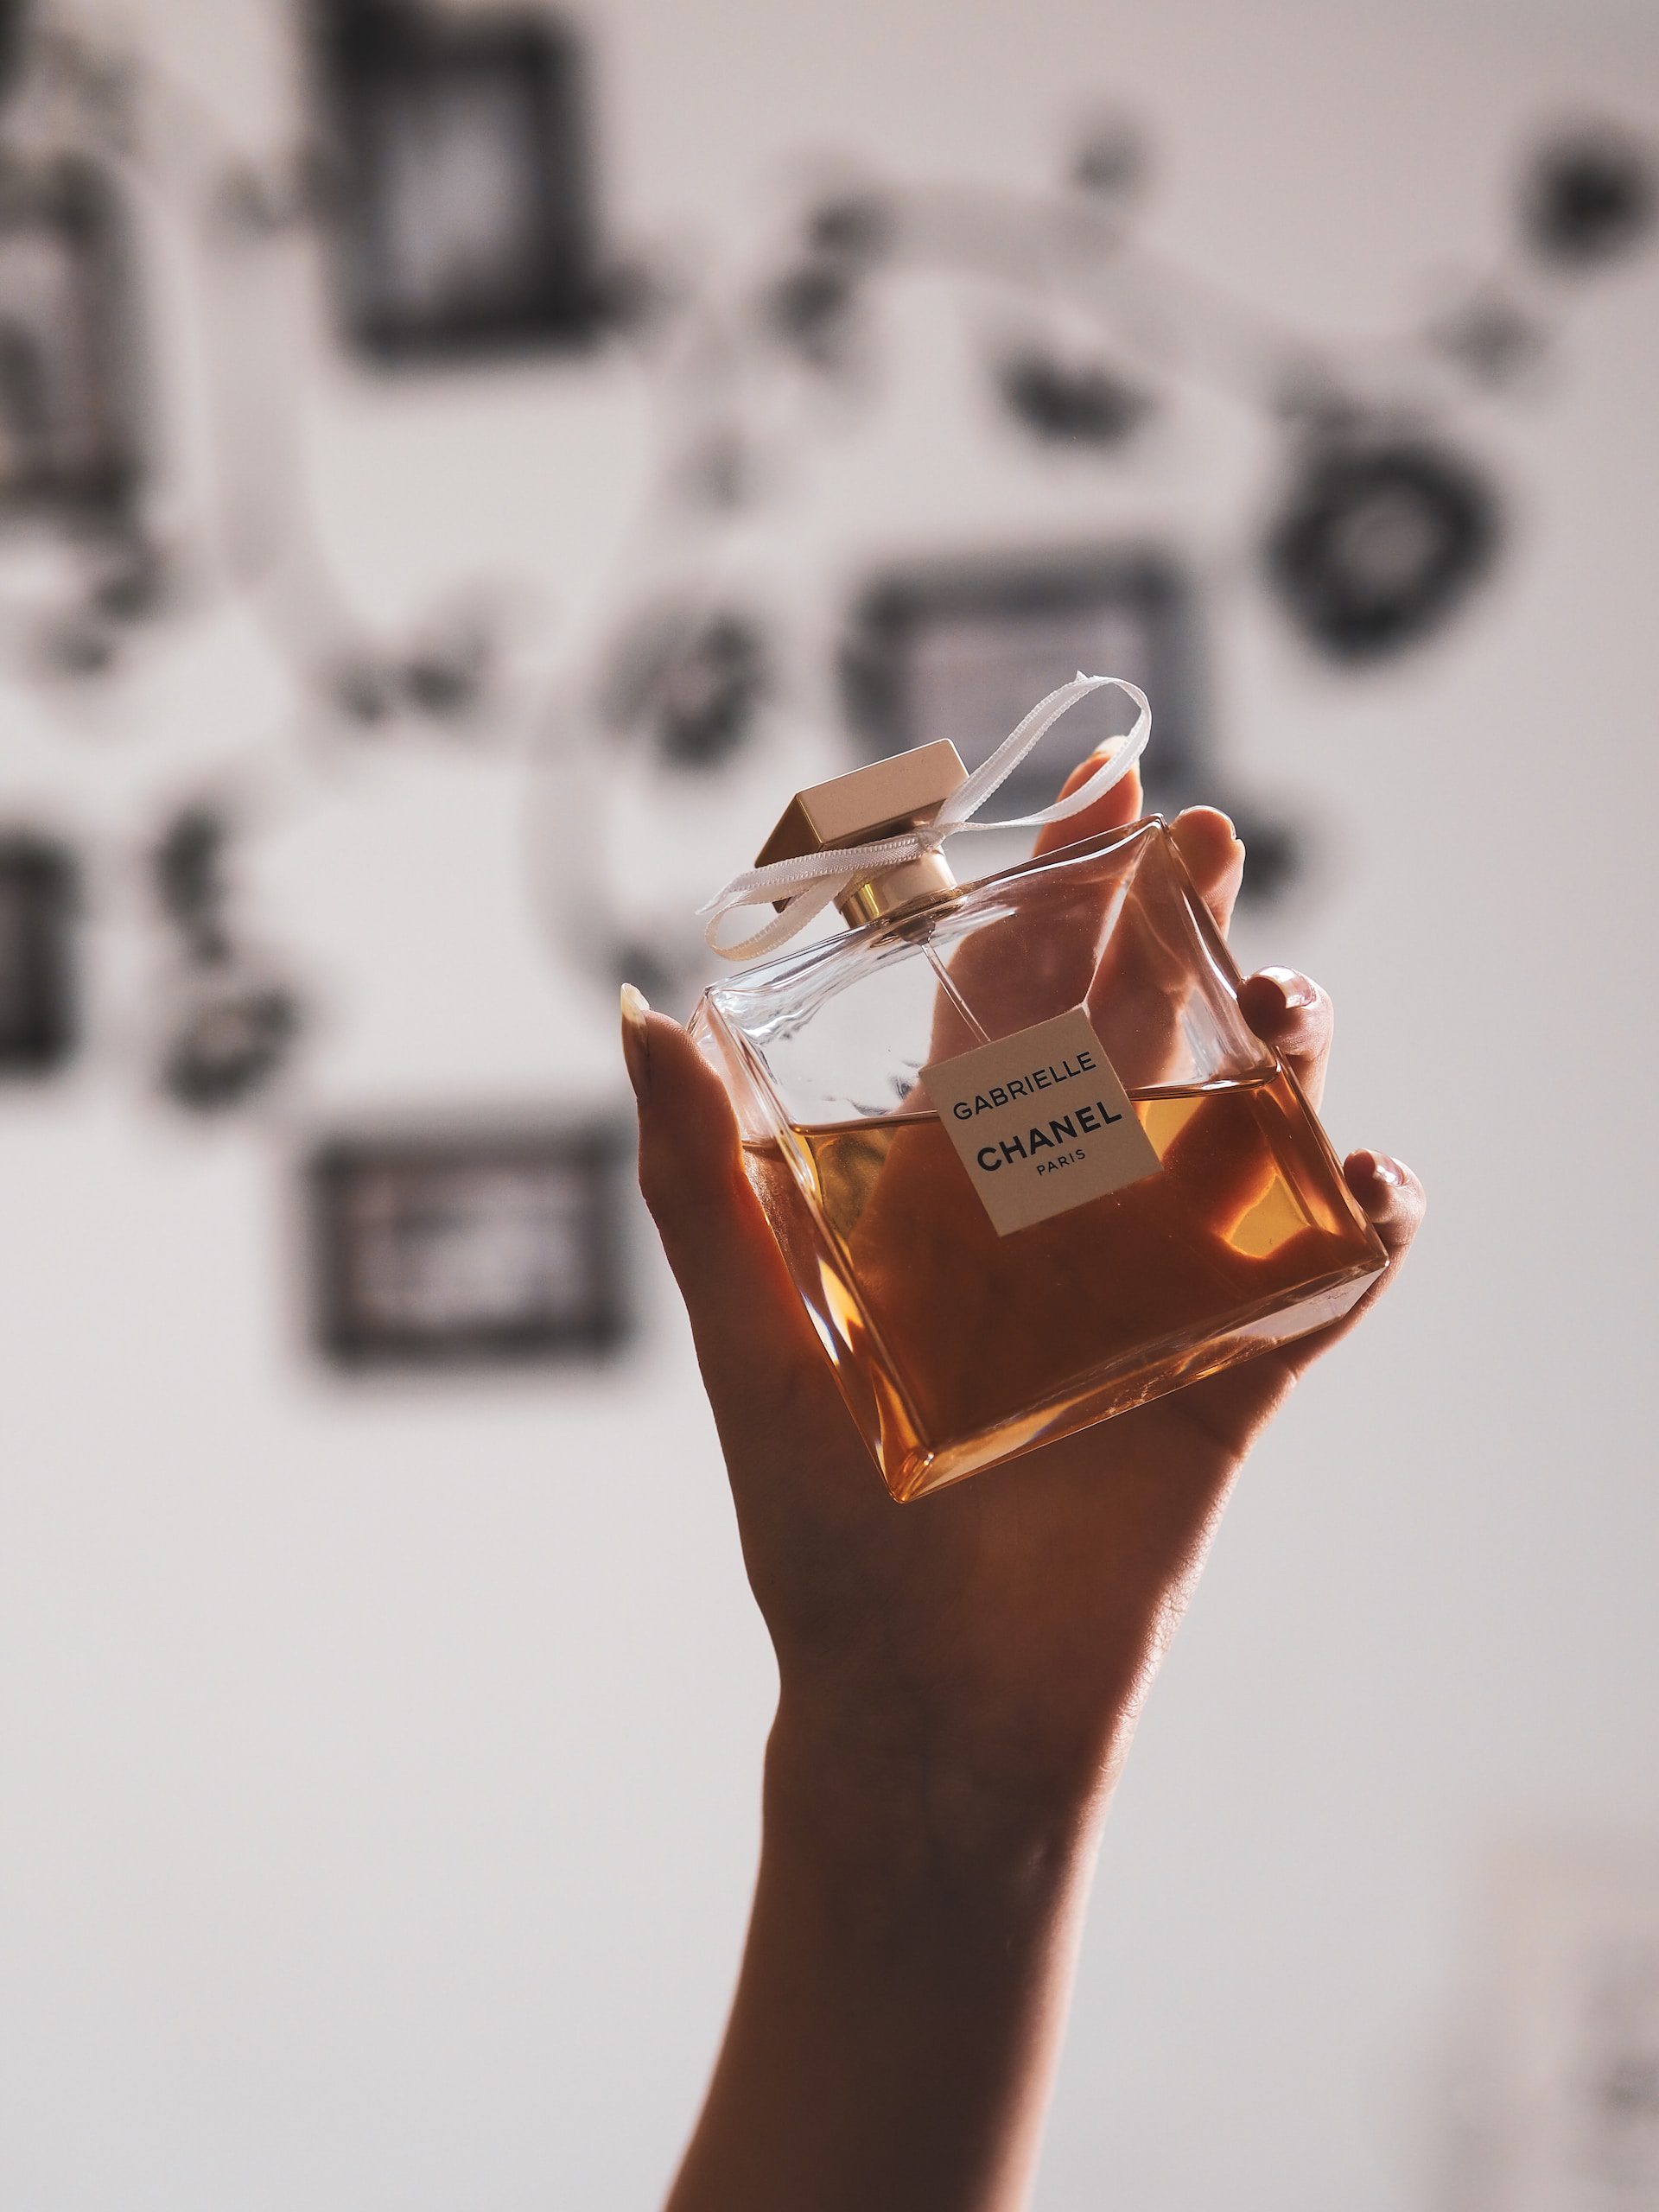 The Top 10 Most Expensive Perfumes in the World